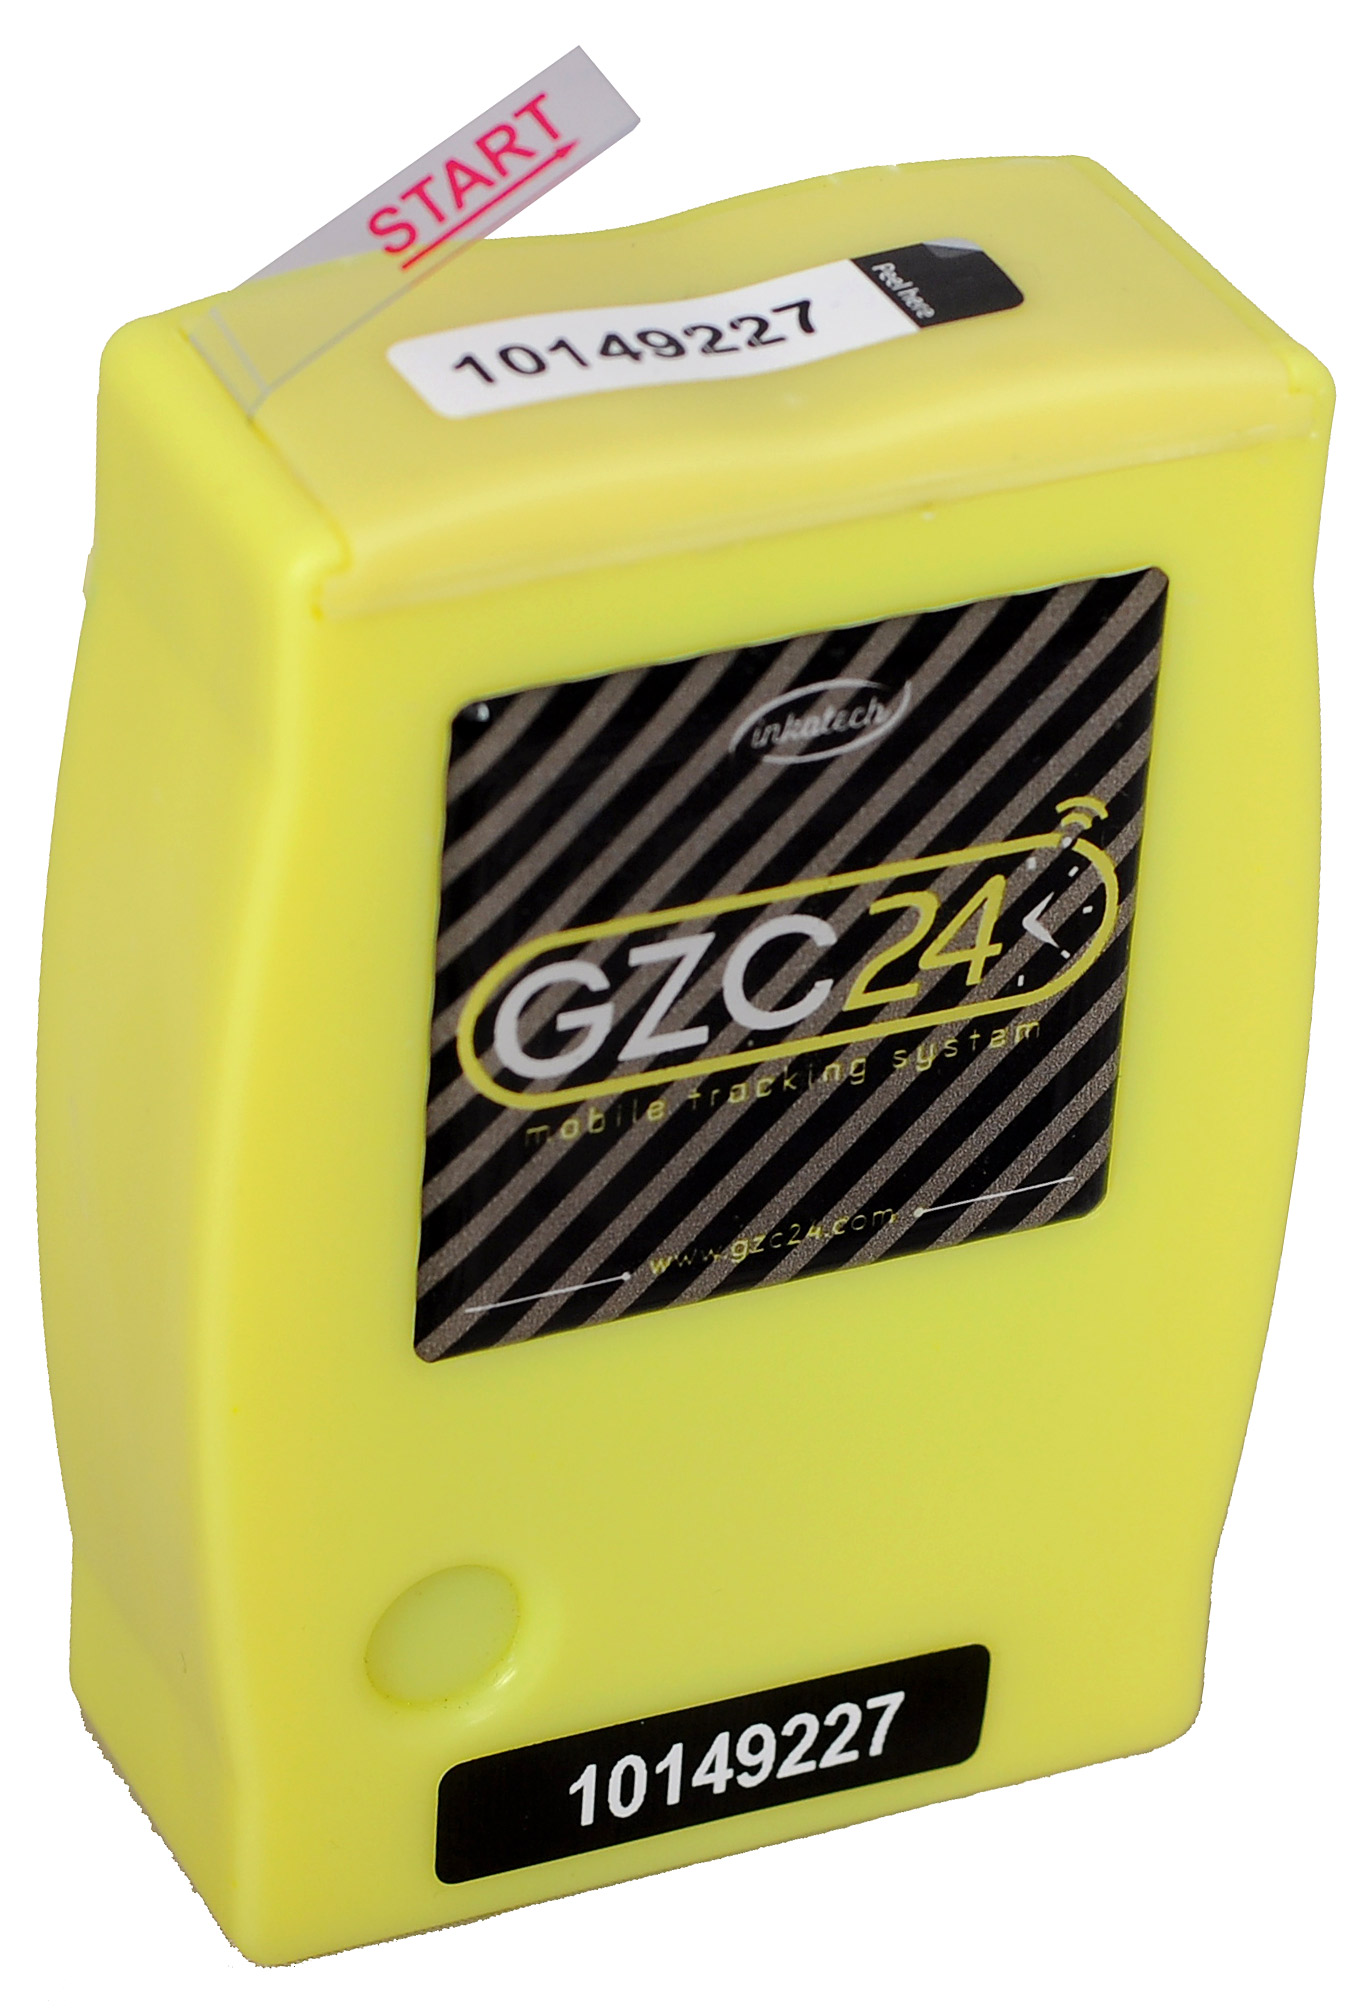 GZC24 temperature and location tracking device